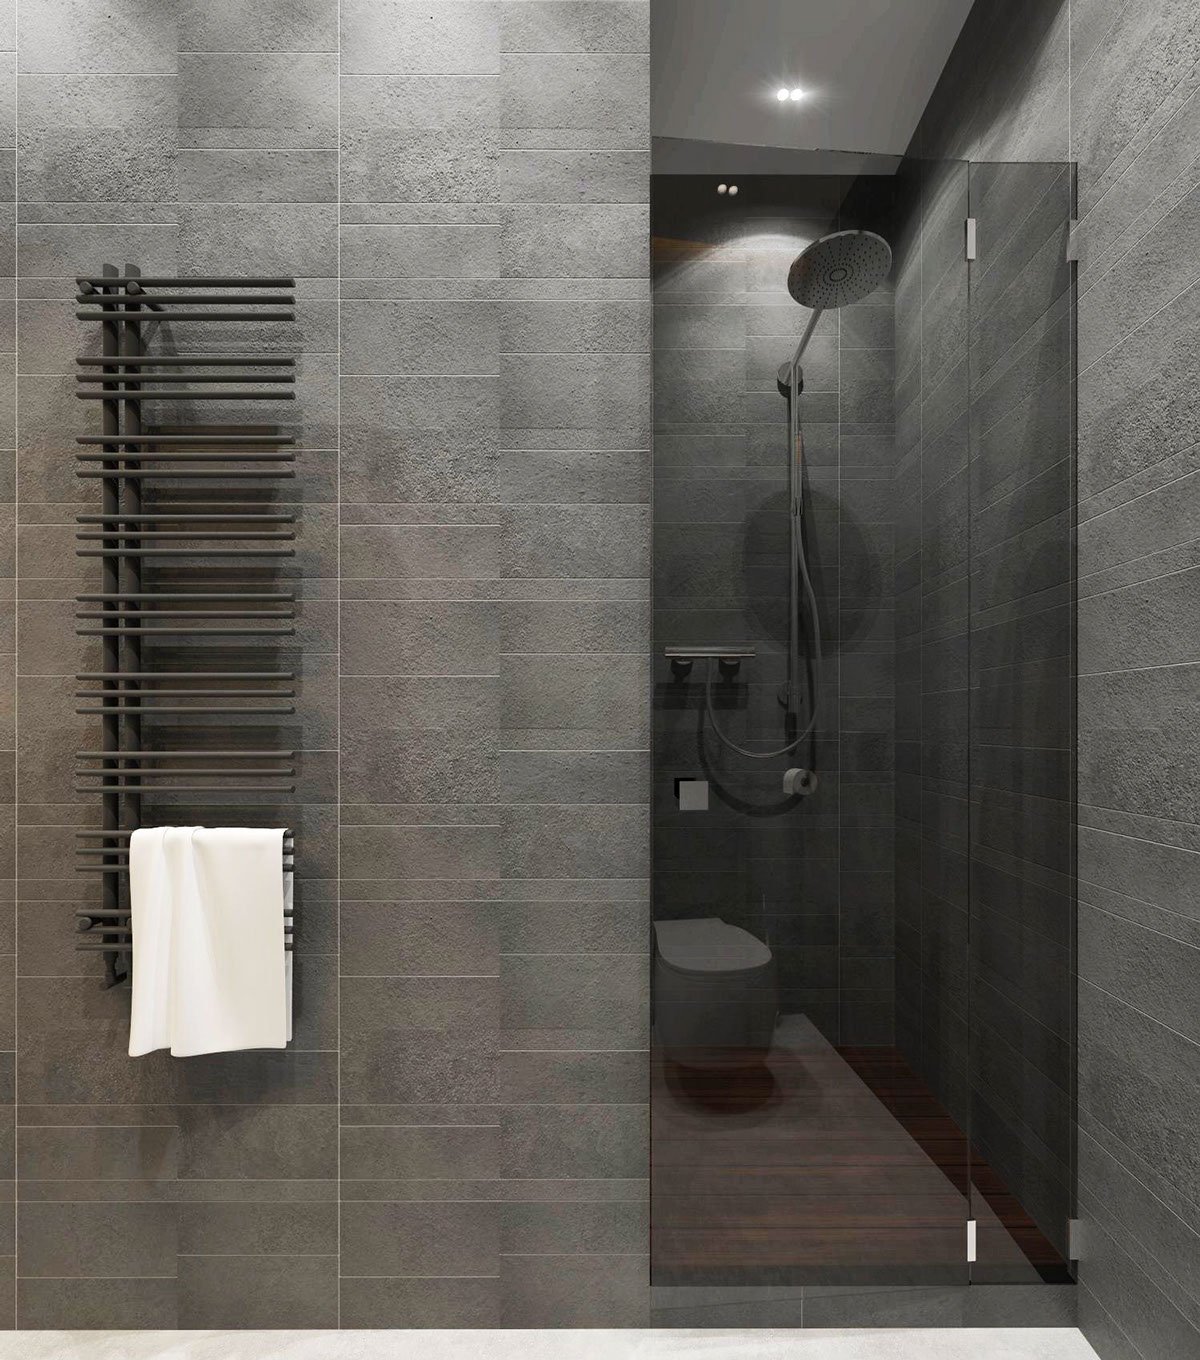 Luxury bathroom design with 2 levels and 2 styles.